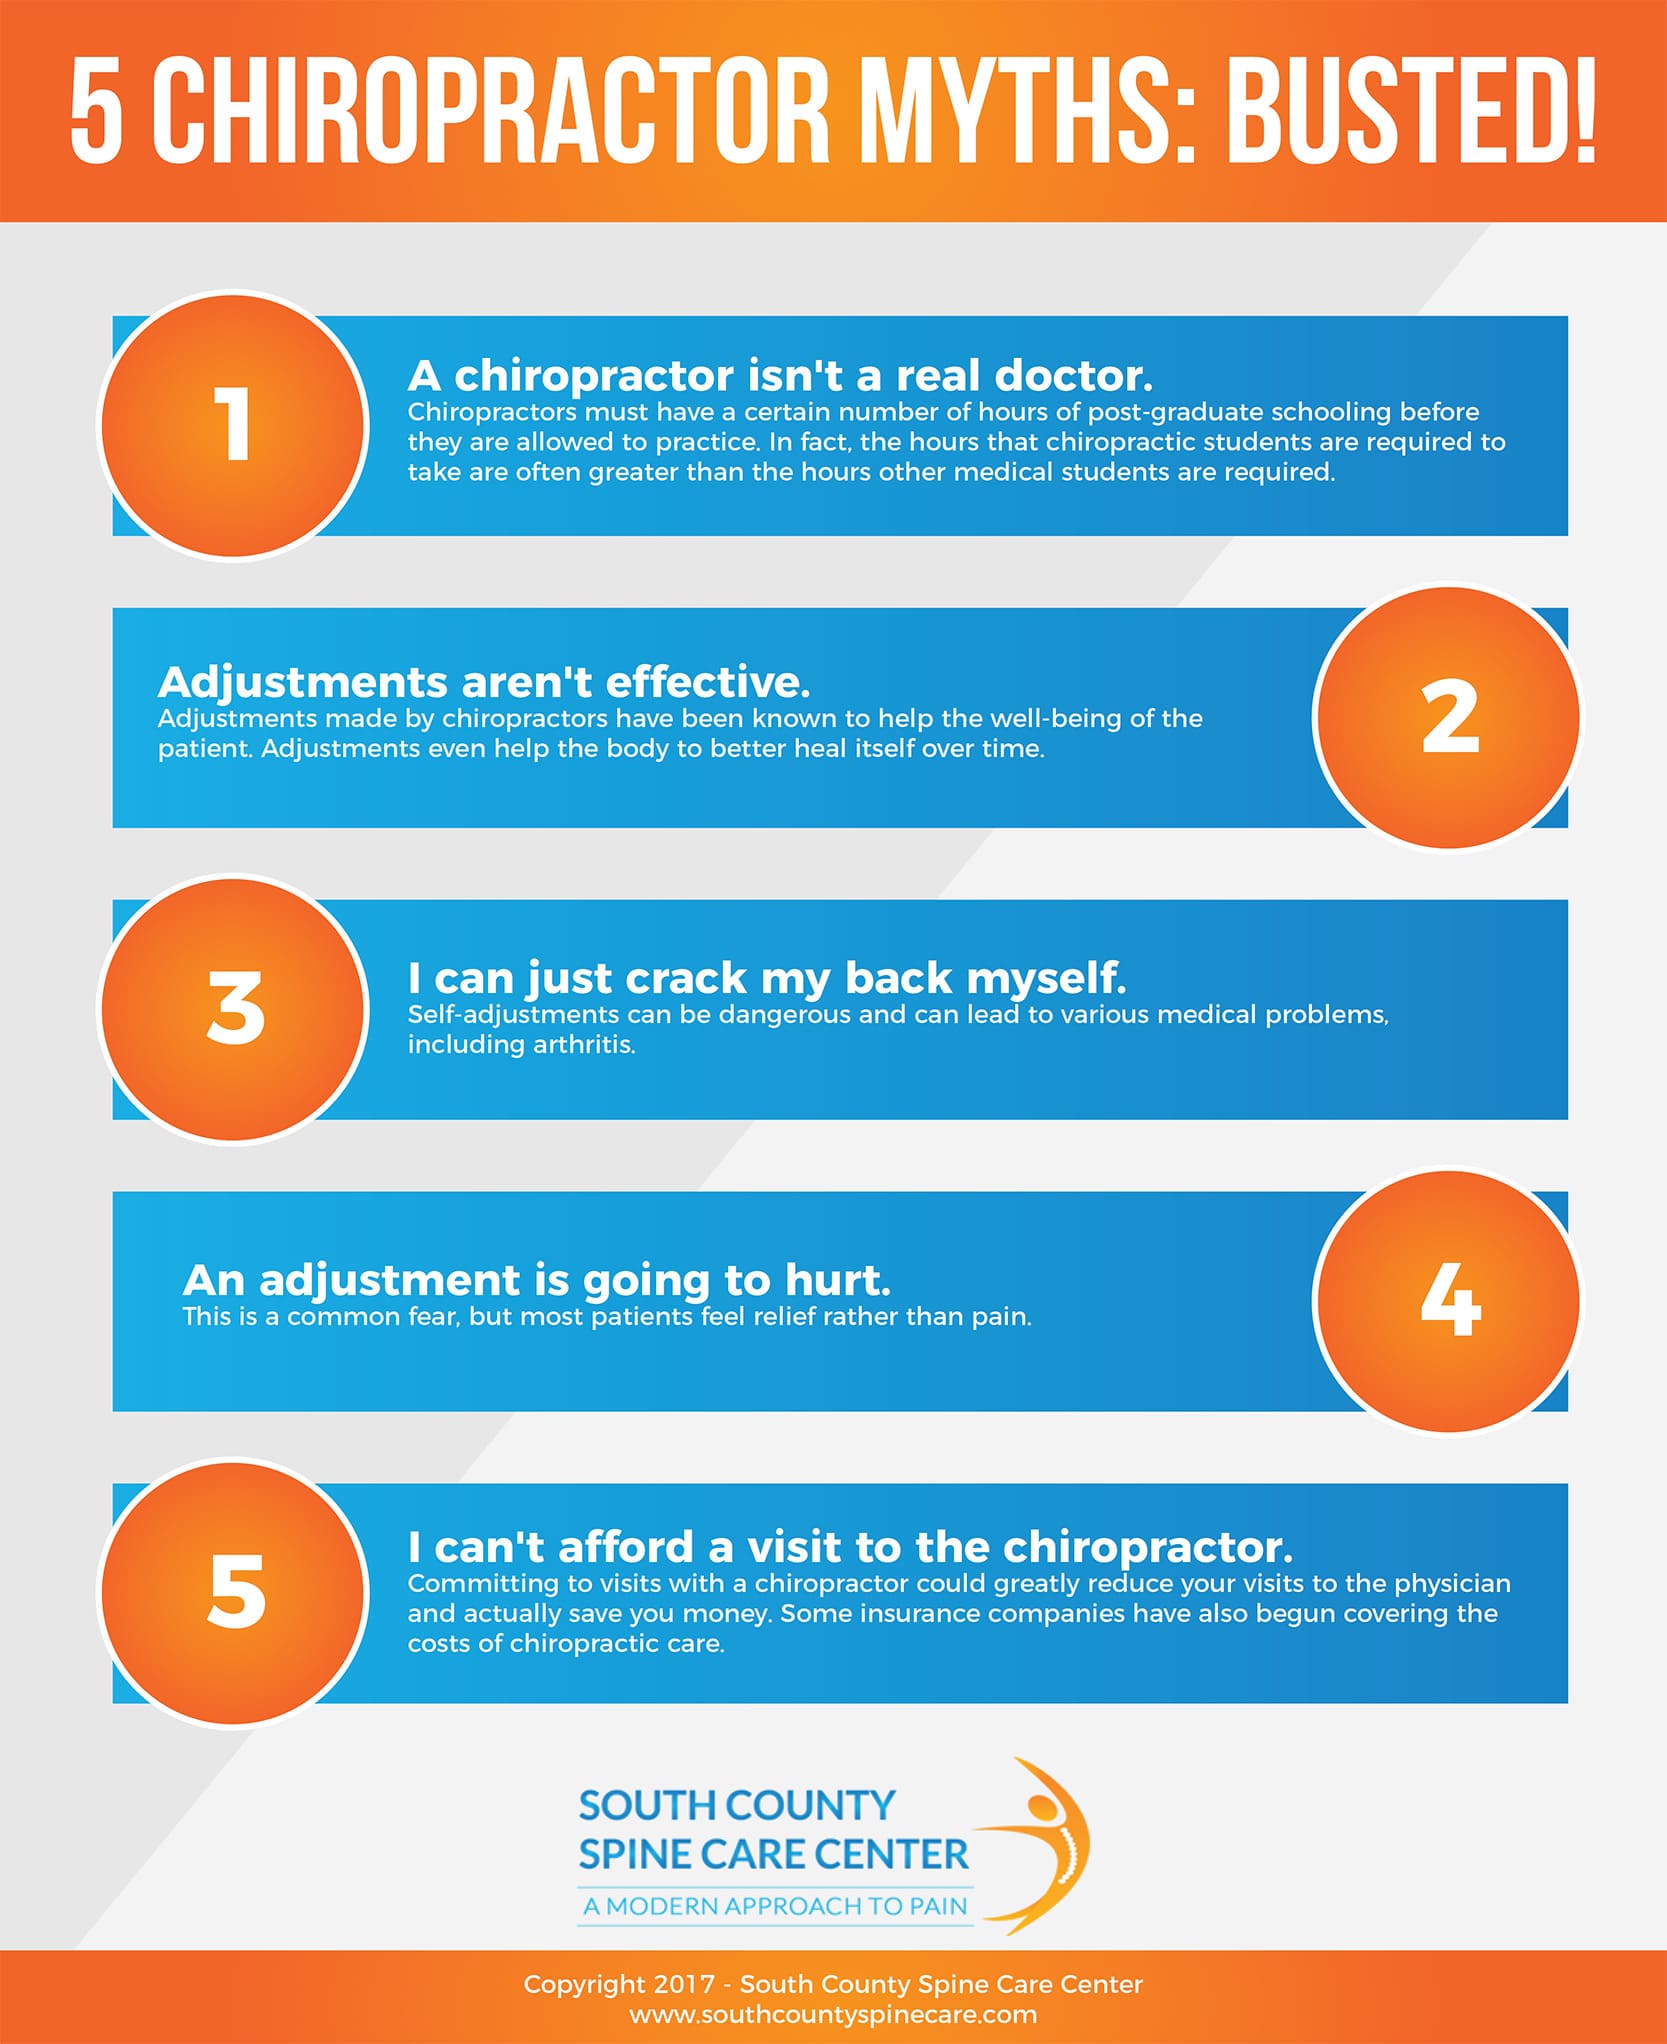 5 Chiropractor Myths: Busted! - South County Spine Care